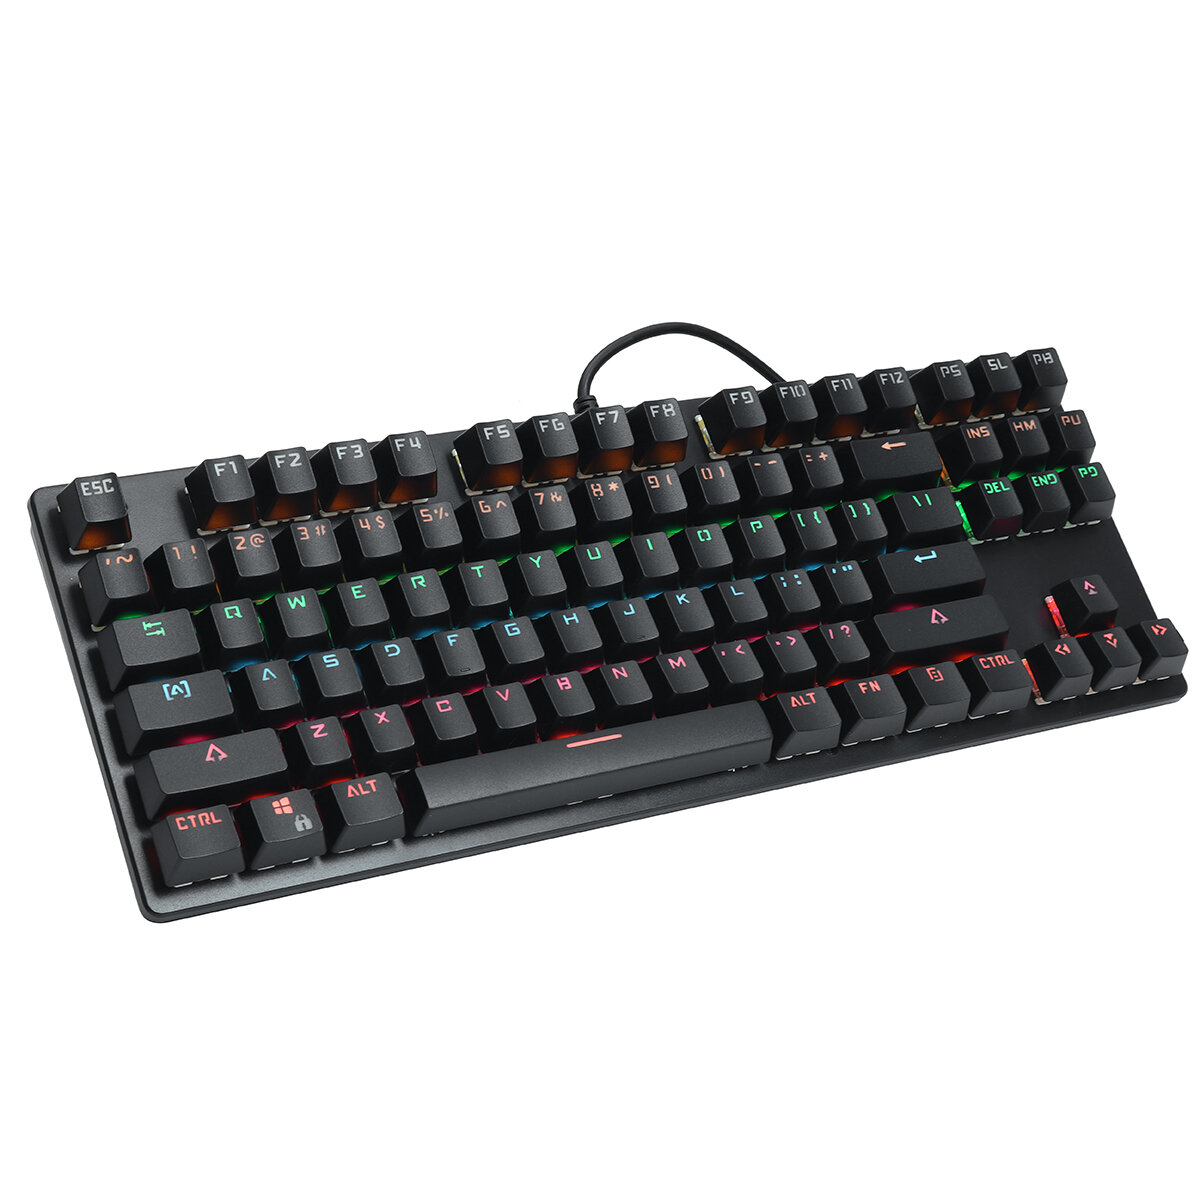 ICEDI K870 Wired Mechanical Keyboard 87 Keys Hot Swappable Blue Switch Suspended Keycaps RGB Backlit